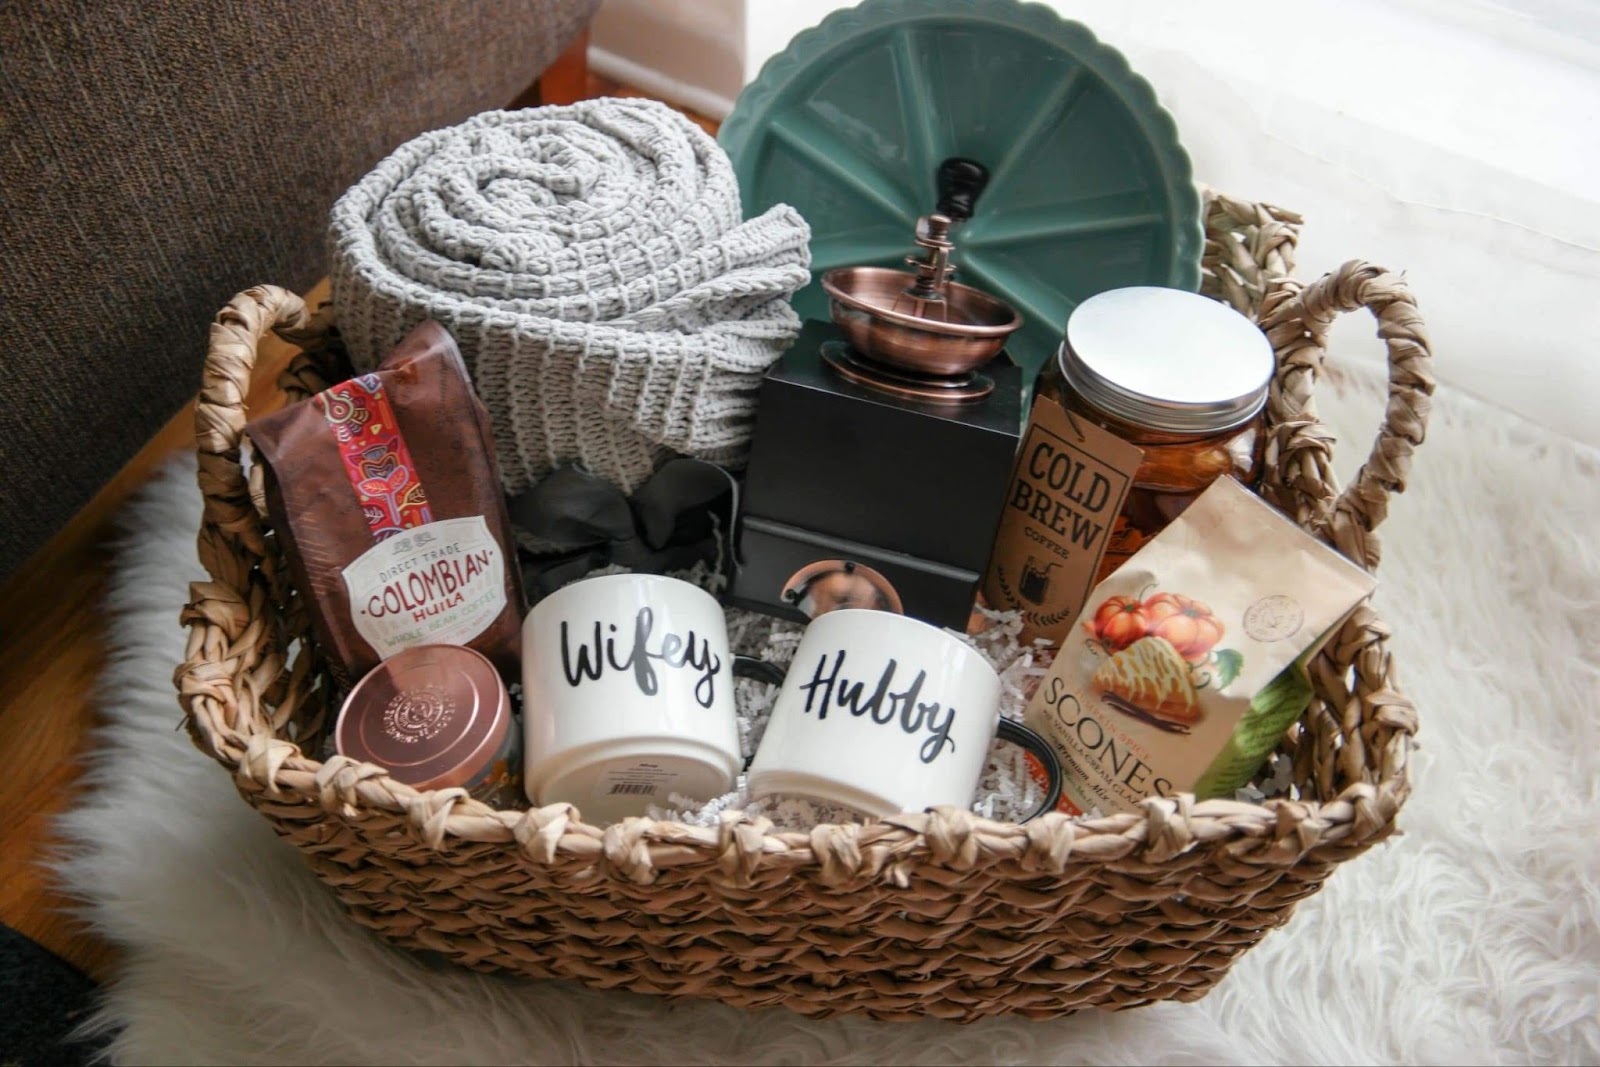 What Sets Gift Baskets Apart from Ordinary Gifts for Valentine’s Day?